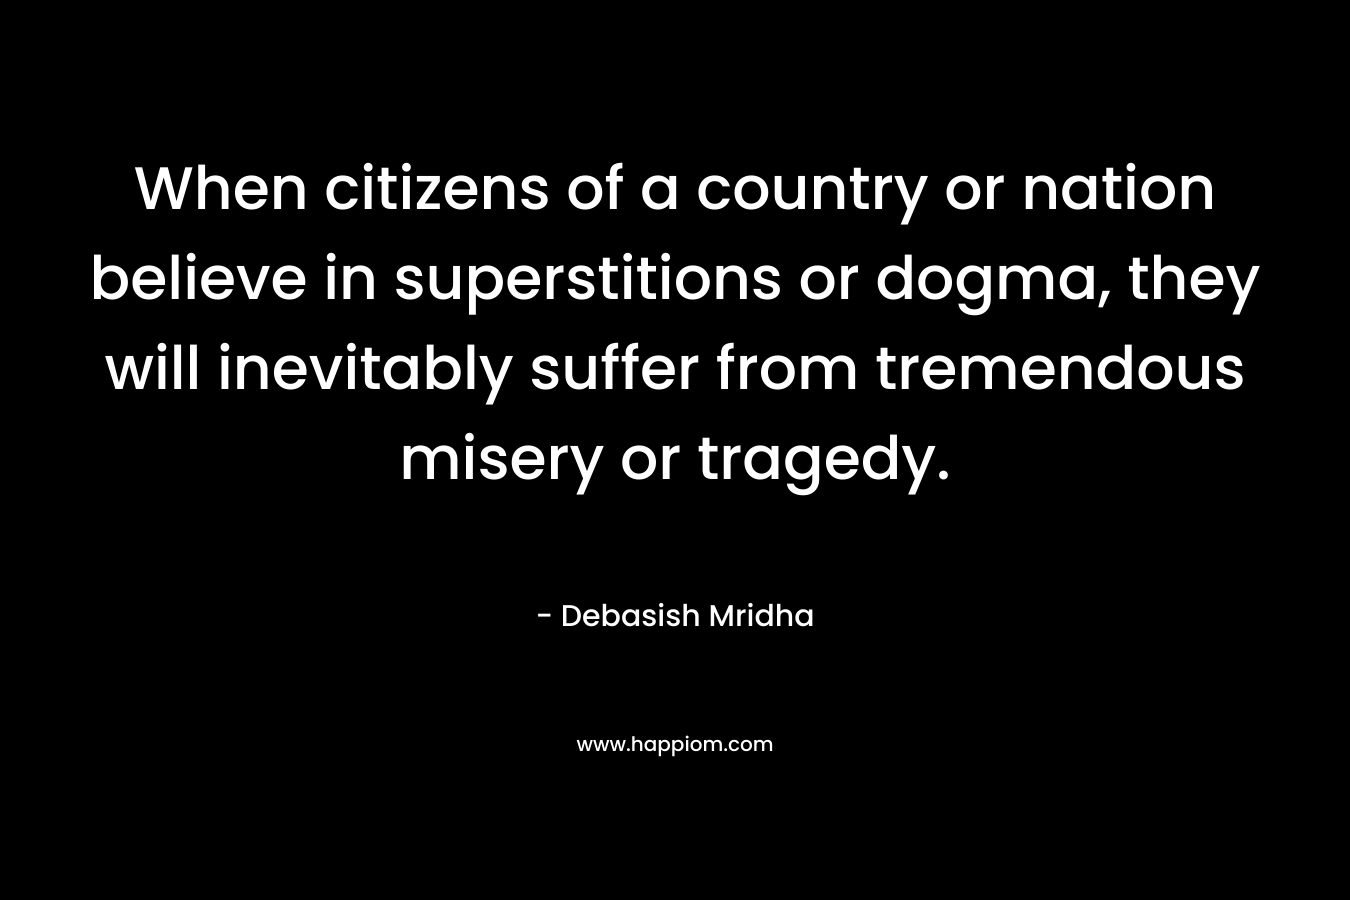 When citizens of a country or nation believe in superstitions or dogma, they will inevitably suffer from tremendous misery or tragedy. – Debasish Mridha